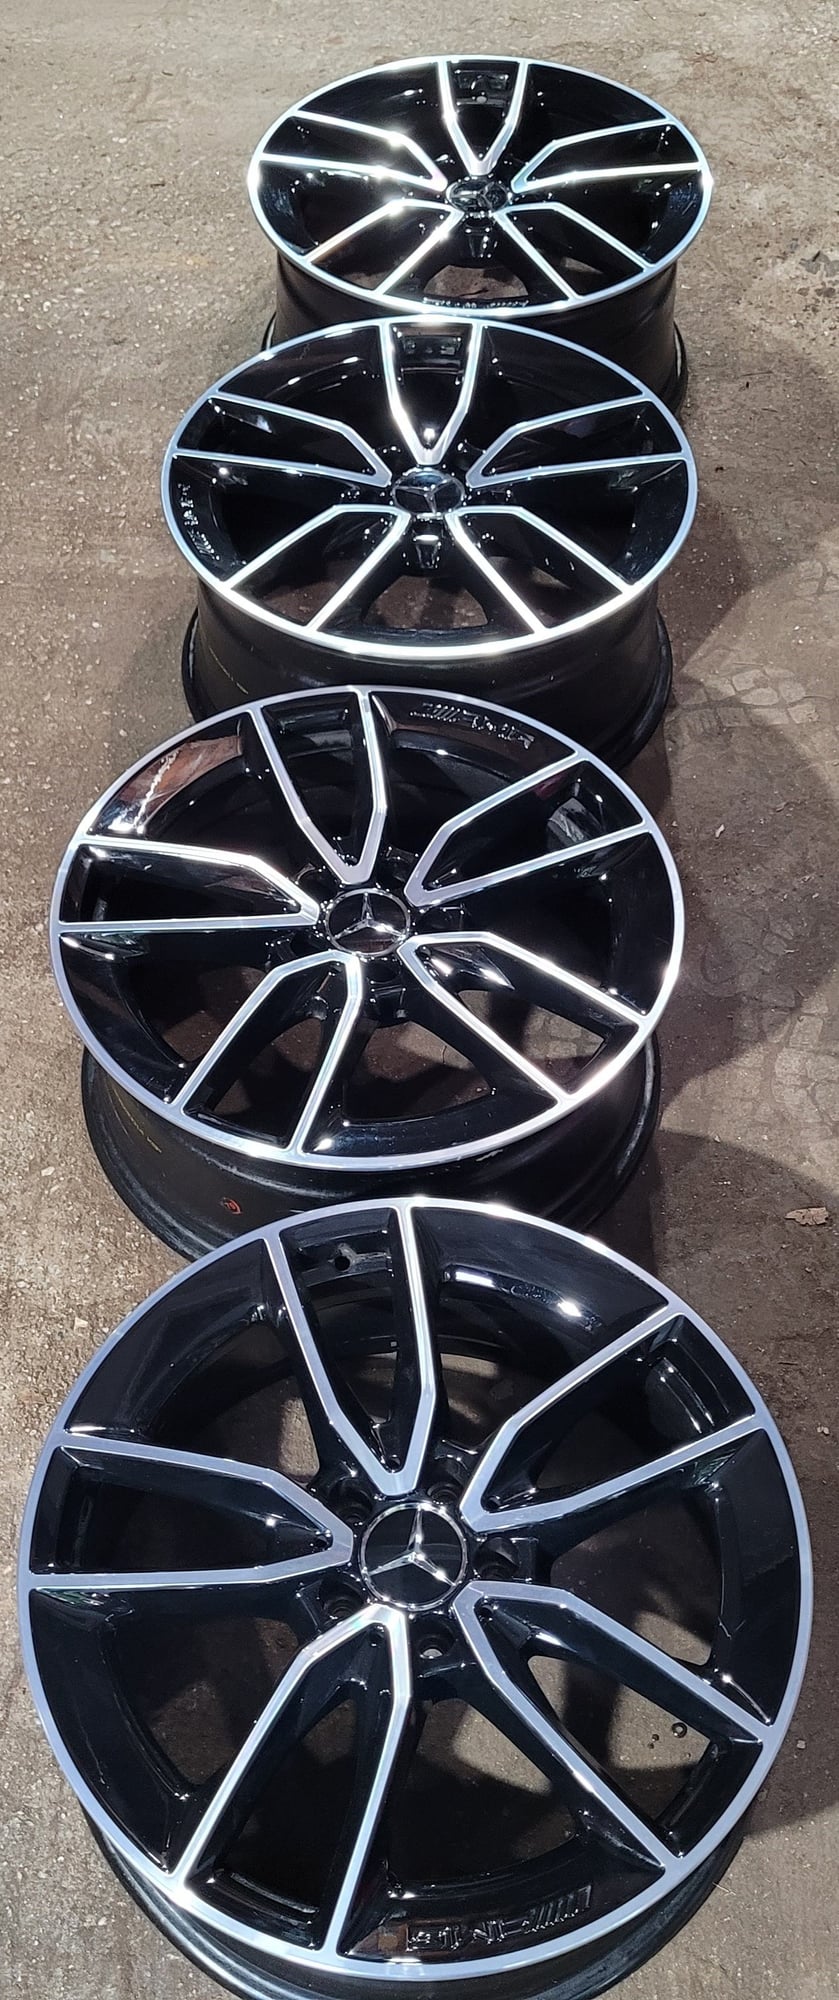 Wheels and Tires/Axles - C43 facelift wheels and tires - Used - 2016 to 2022 Mercedes-Benz C43 AMG - Westchester, NY 10583, United States